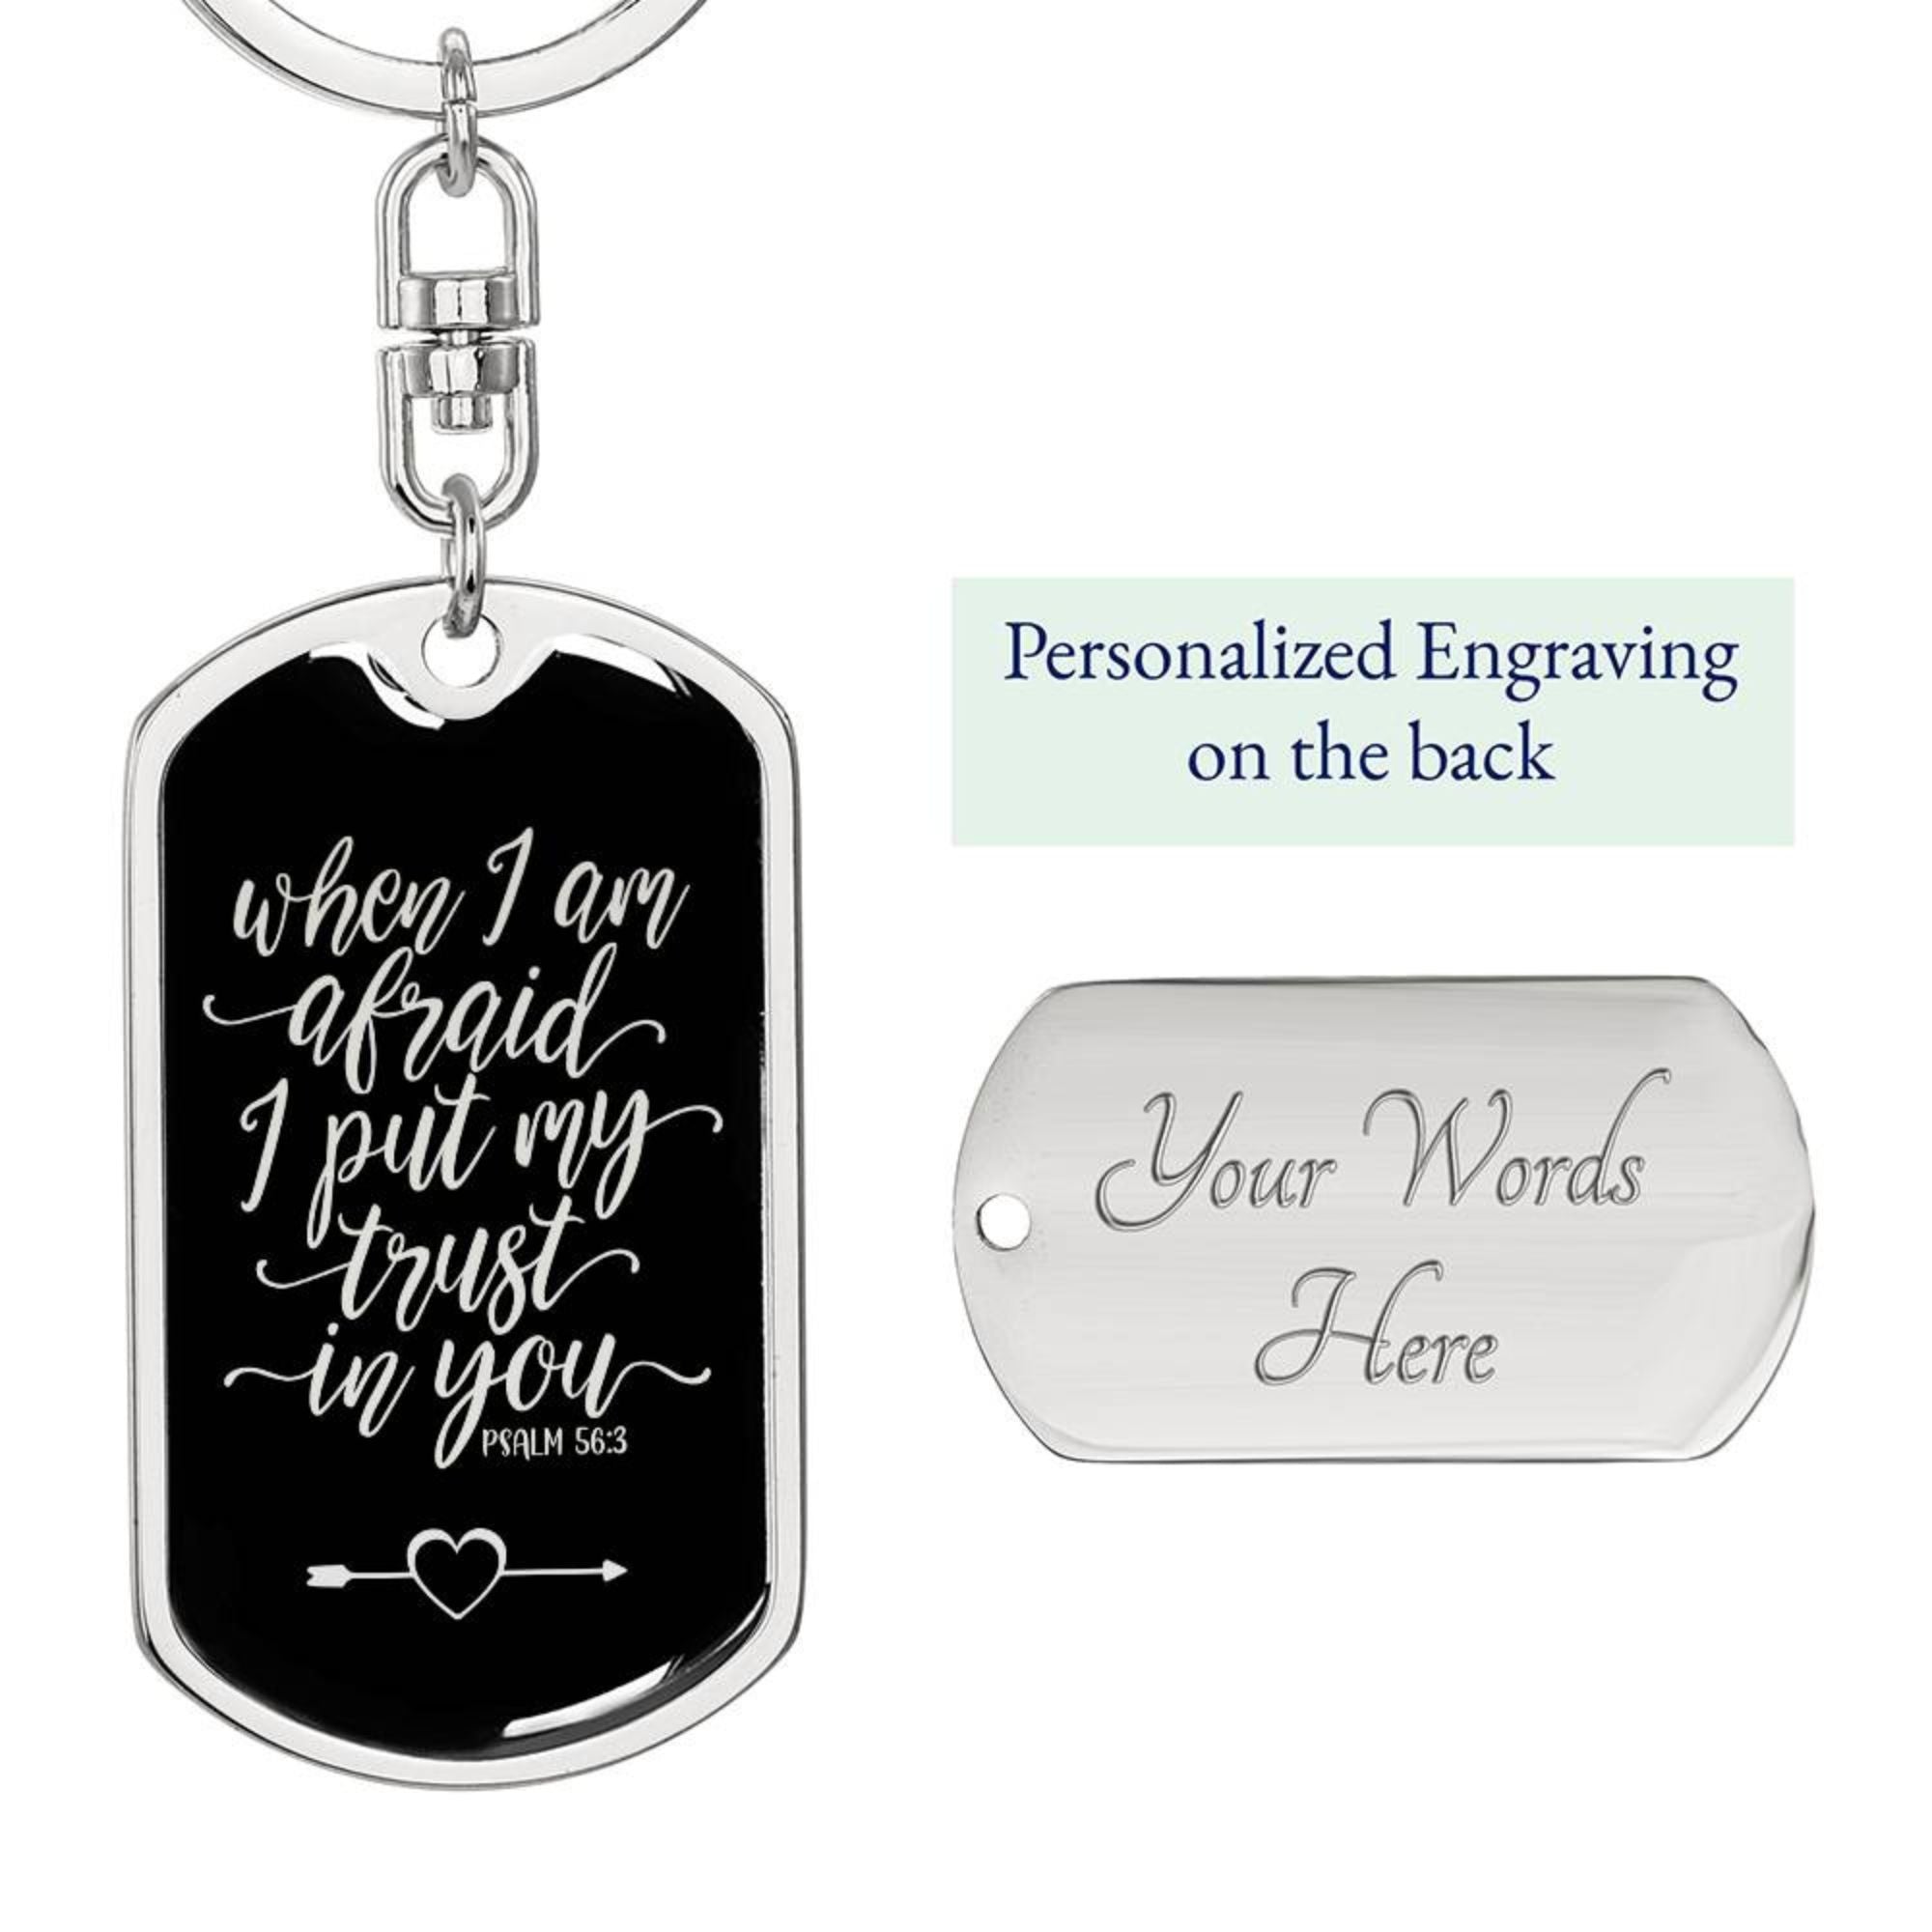 Trust in You Psalm 56:3 - Silver Dog Tag with Swivel Keychain Engraving: Yes Jesus Passion Apparel